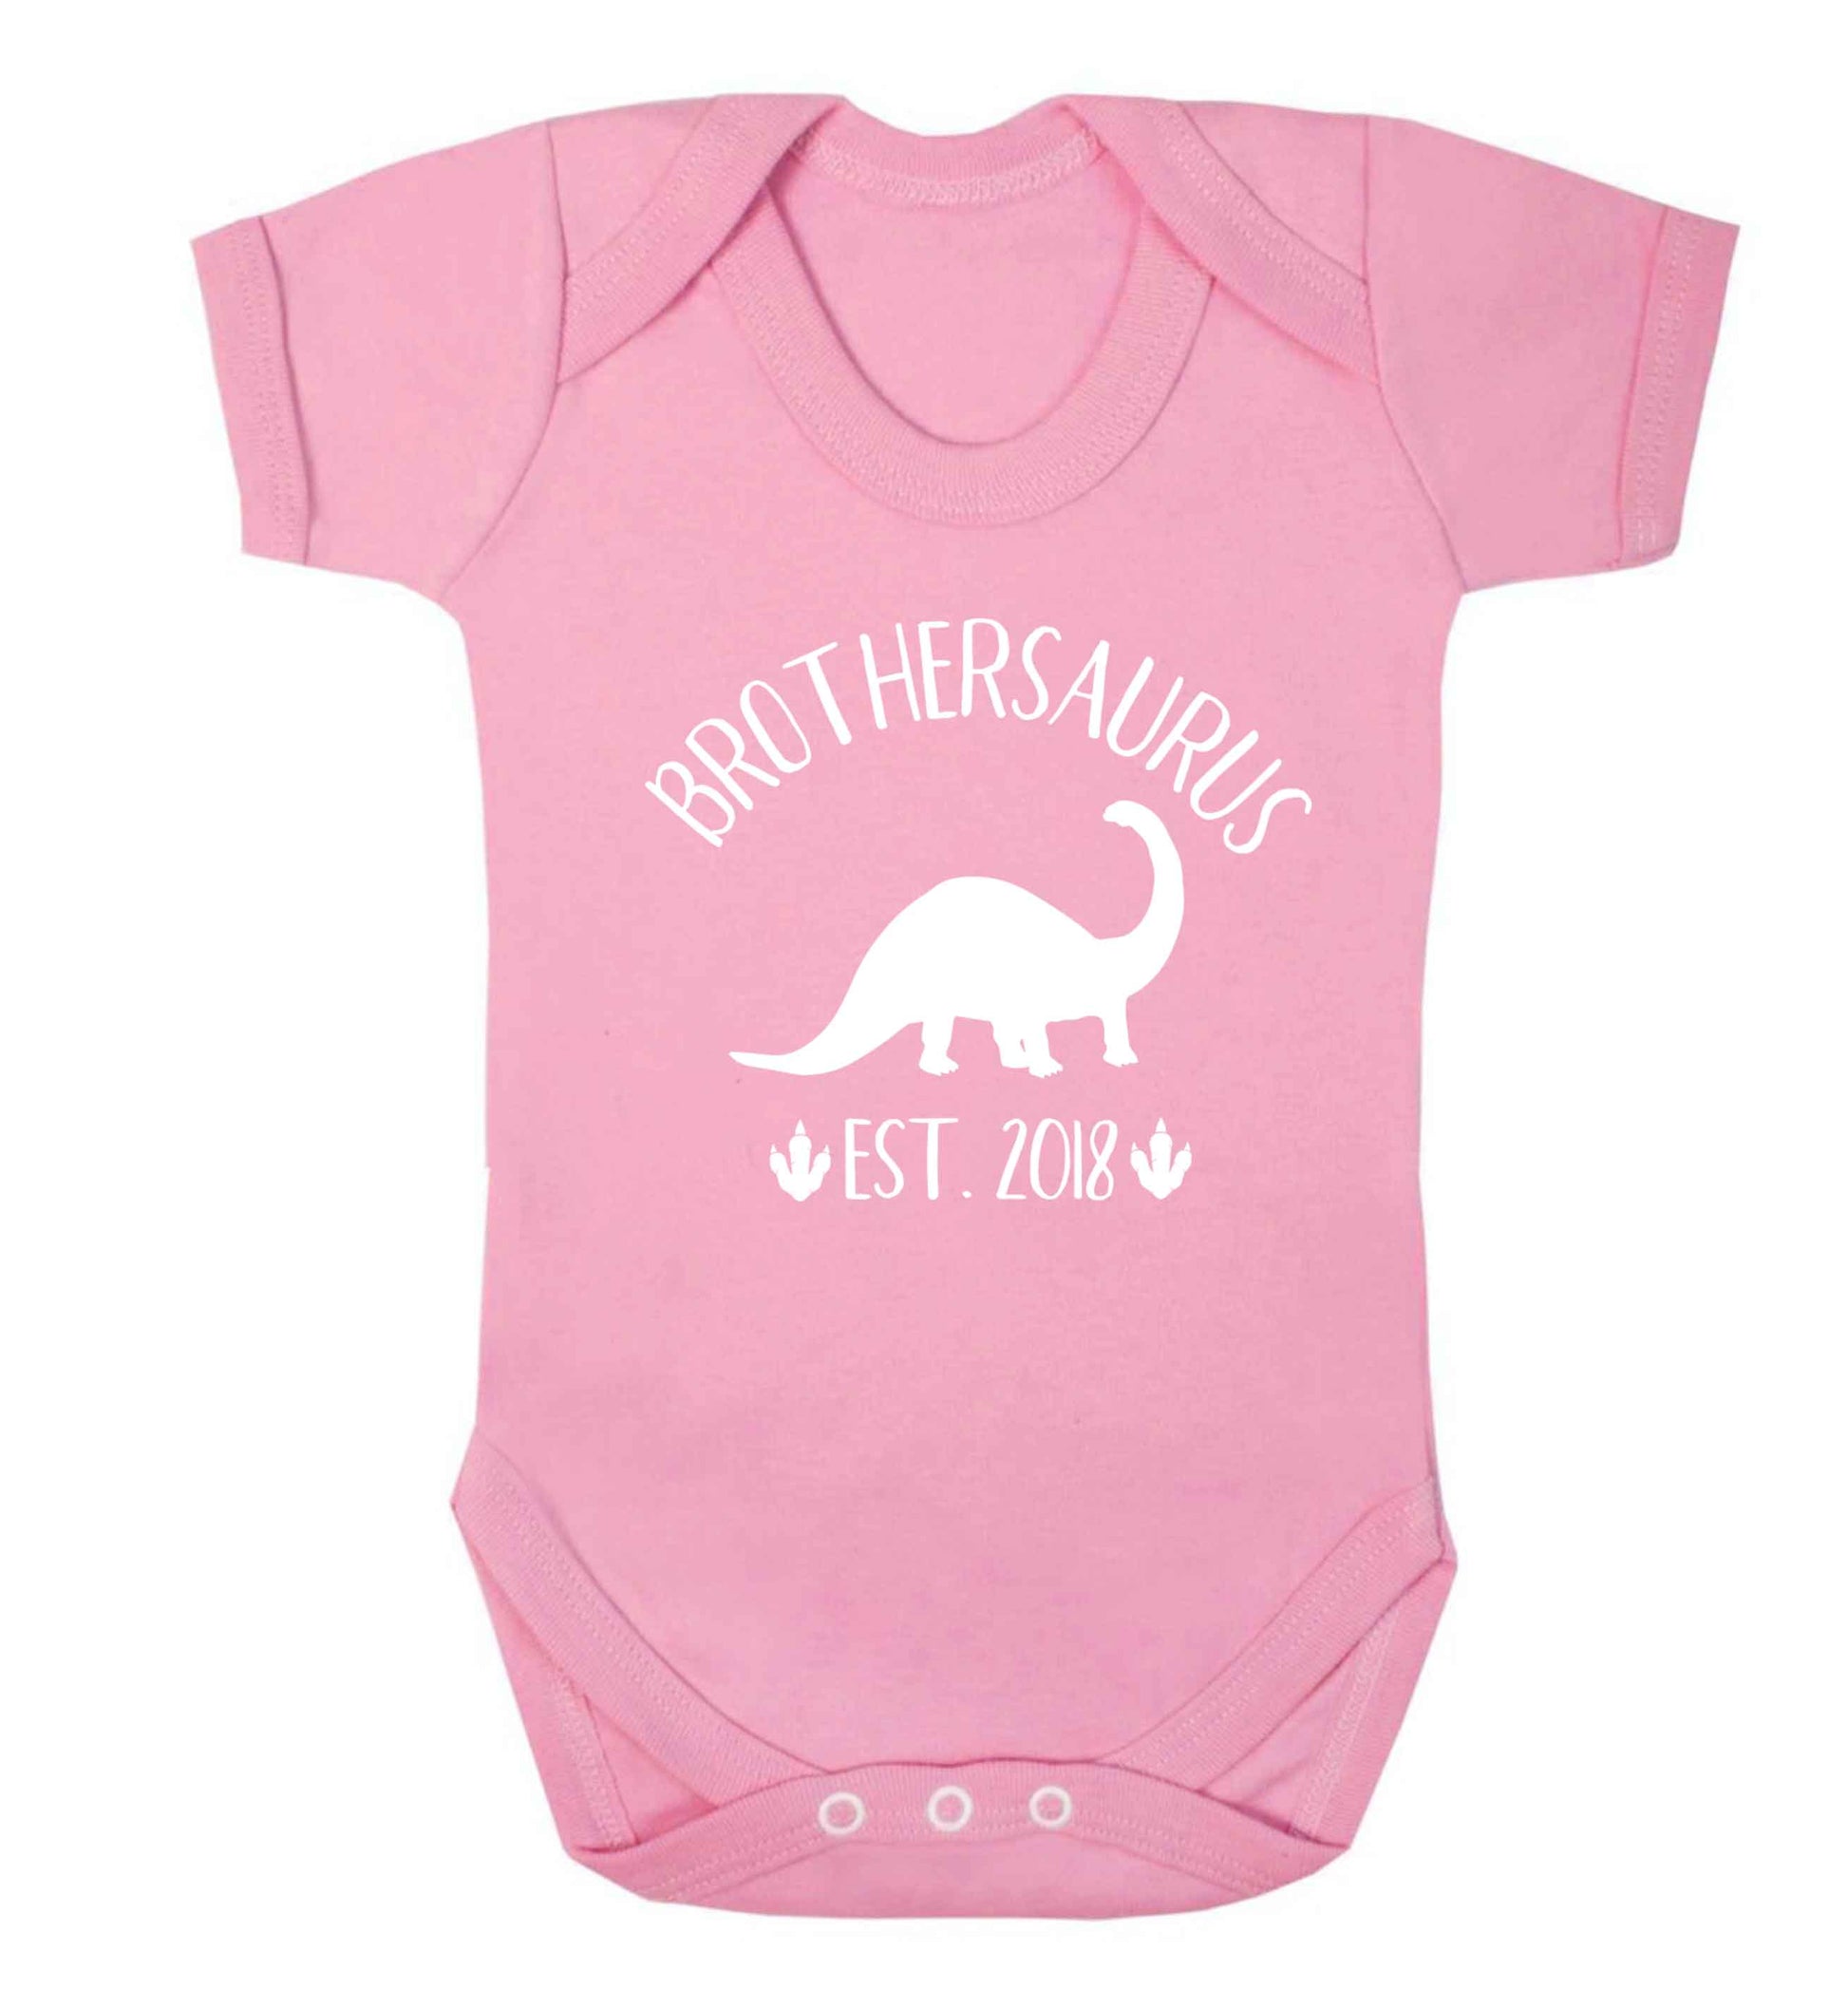 Personalised brothersaurus since (custom date) Baby Vest pale pink 18-24 months